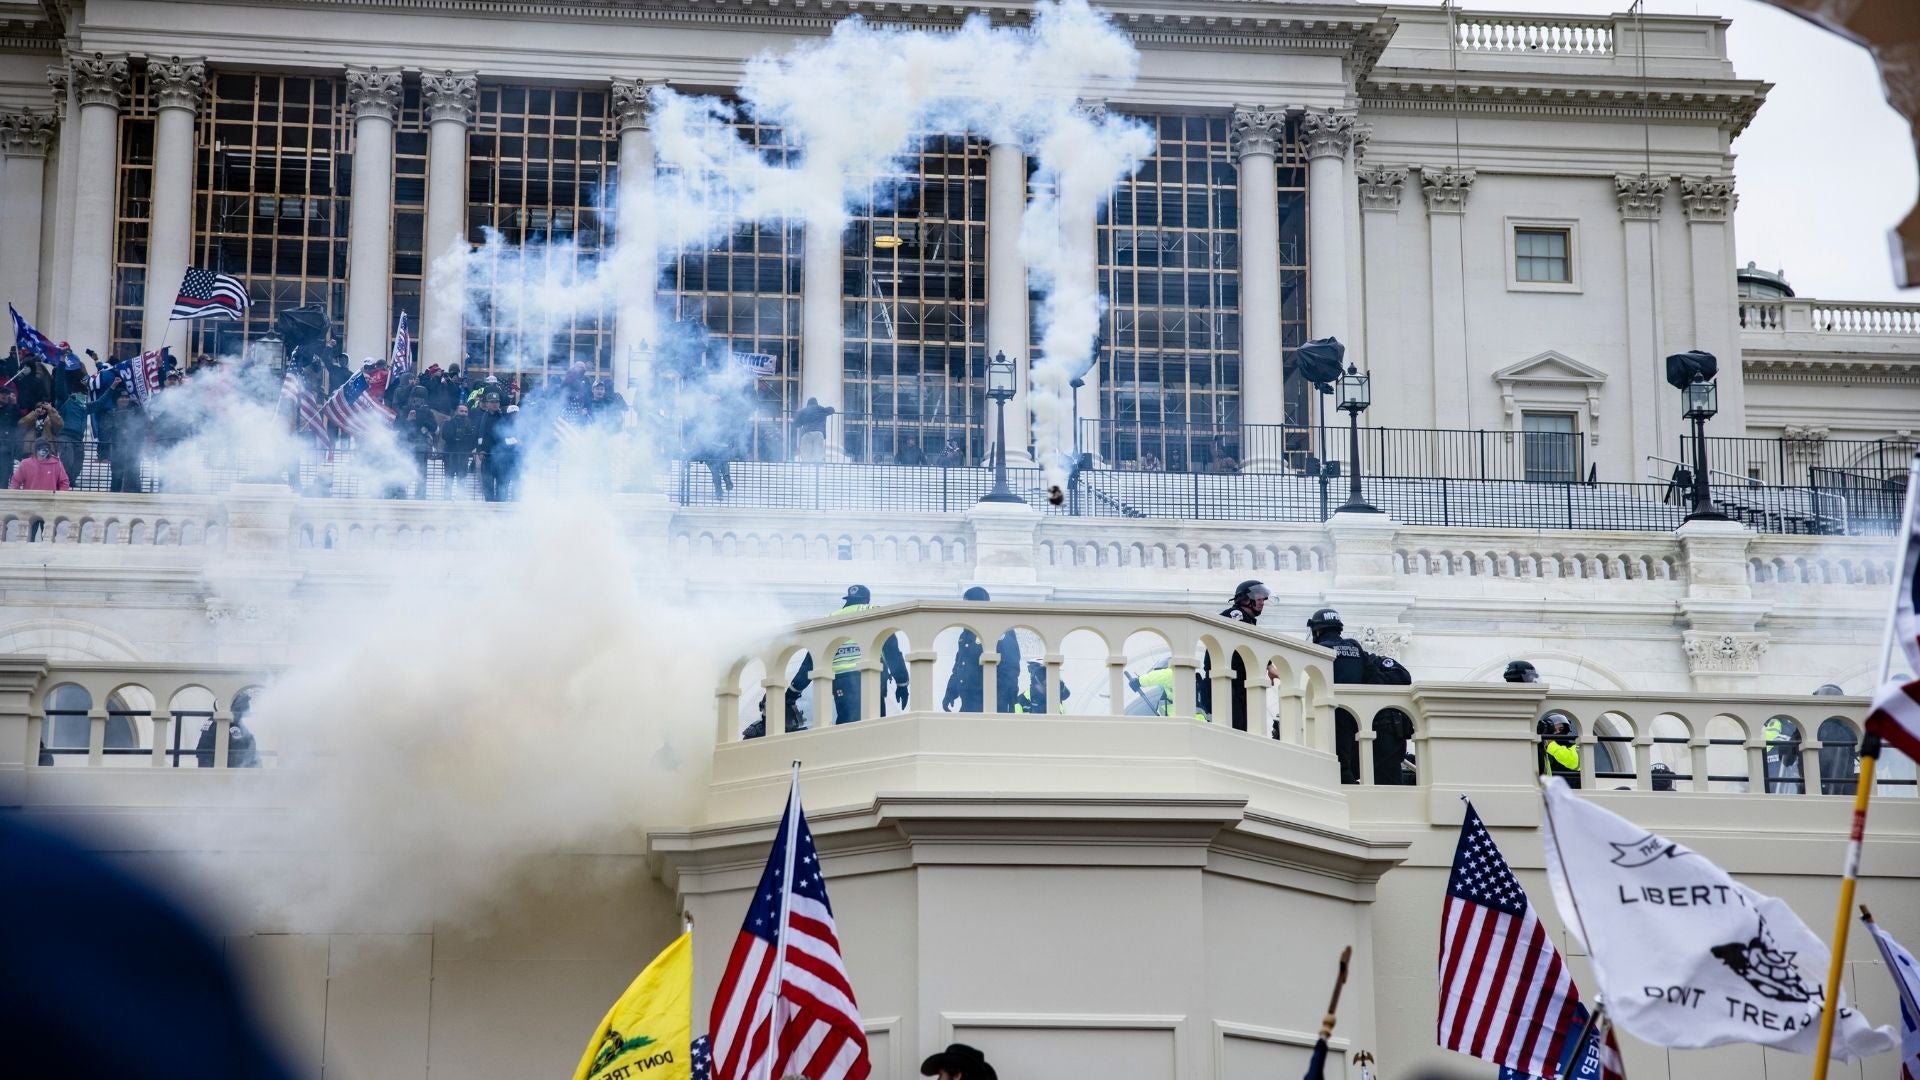 The Jan. 6 Capitol Riot, incited by Donald Trump, resulted in the death's of five people. (Photo: Samuel Corum, Getty Images)